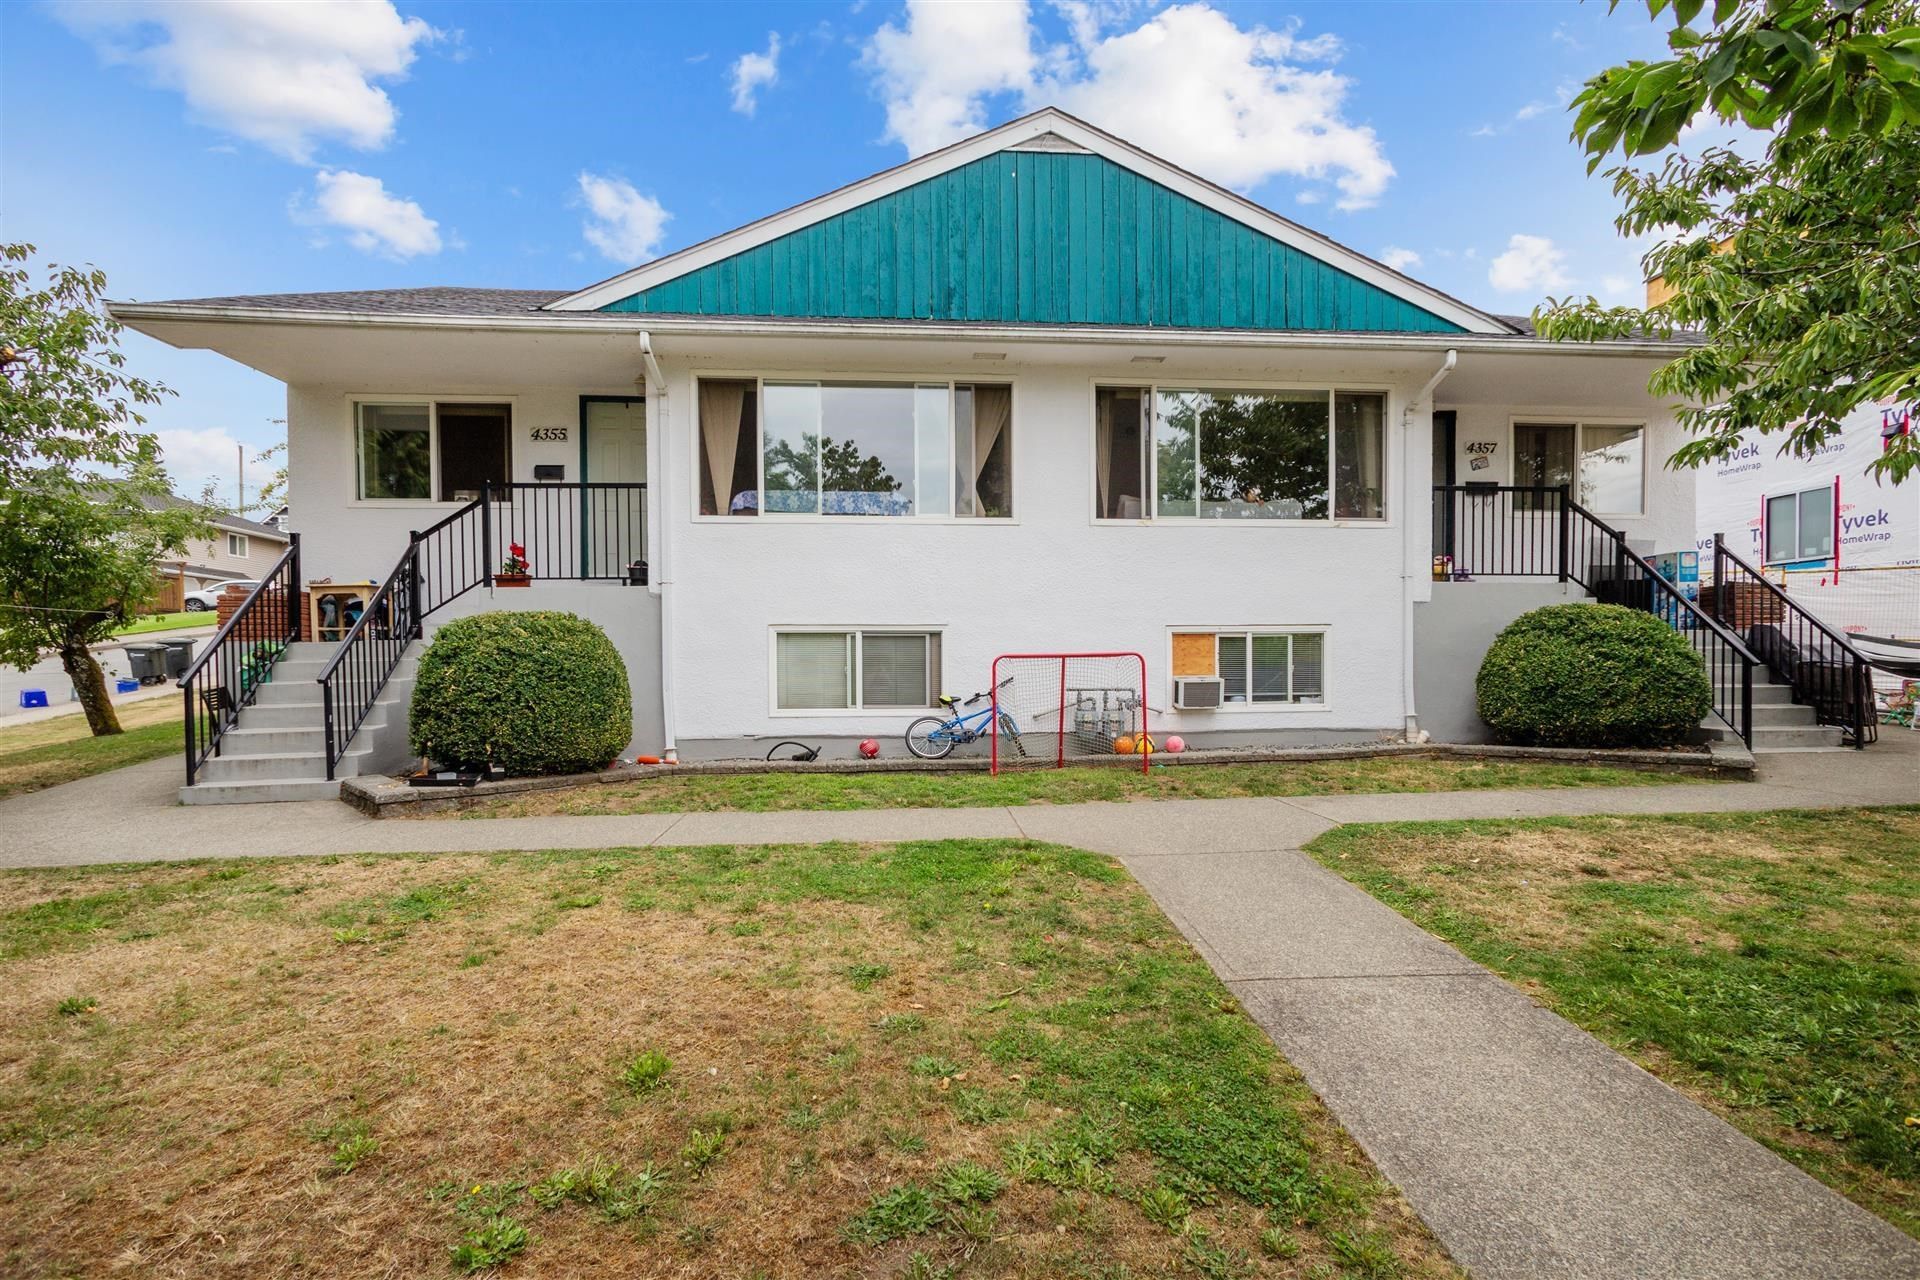 Neighbourhood Real Estate has just listed ANOTHER home in South Slope, Burnaby South